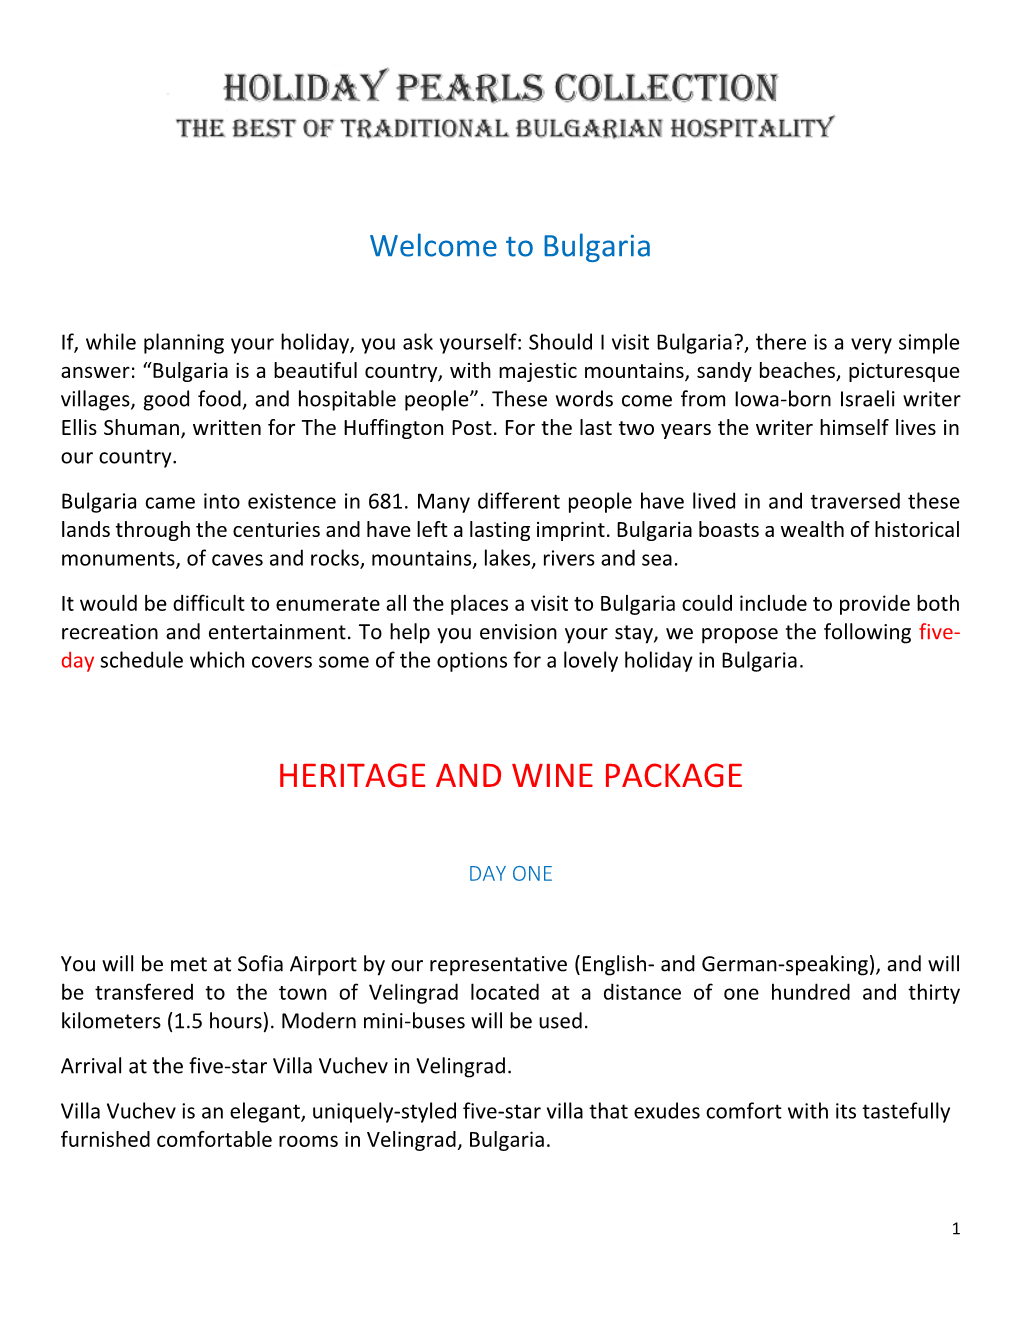 Heritage and Wine Package